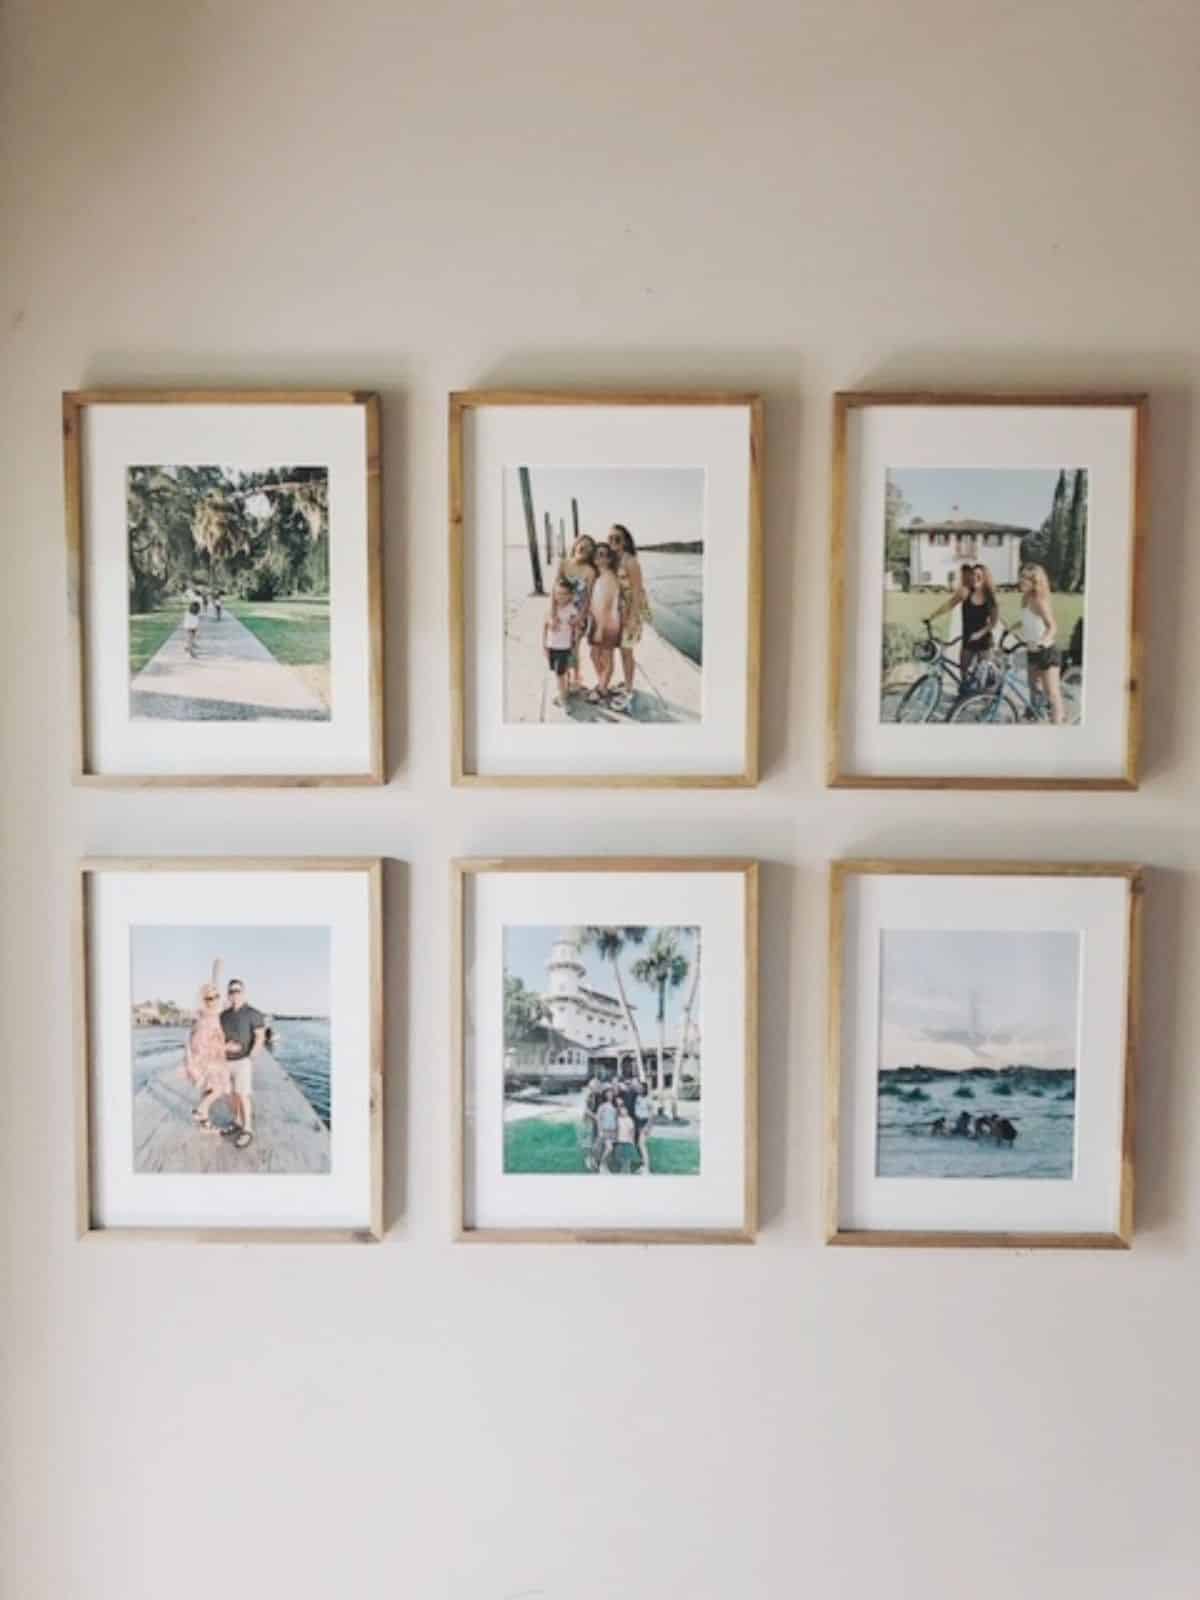 Identical photo Frames on the wall